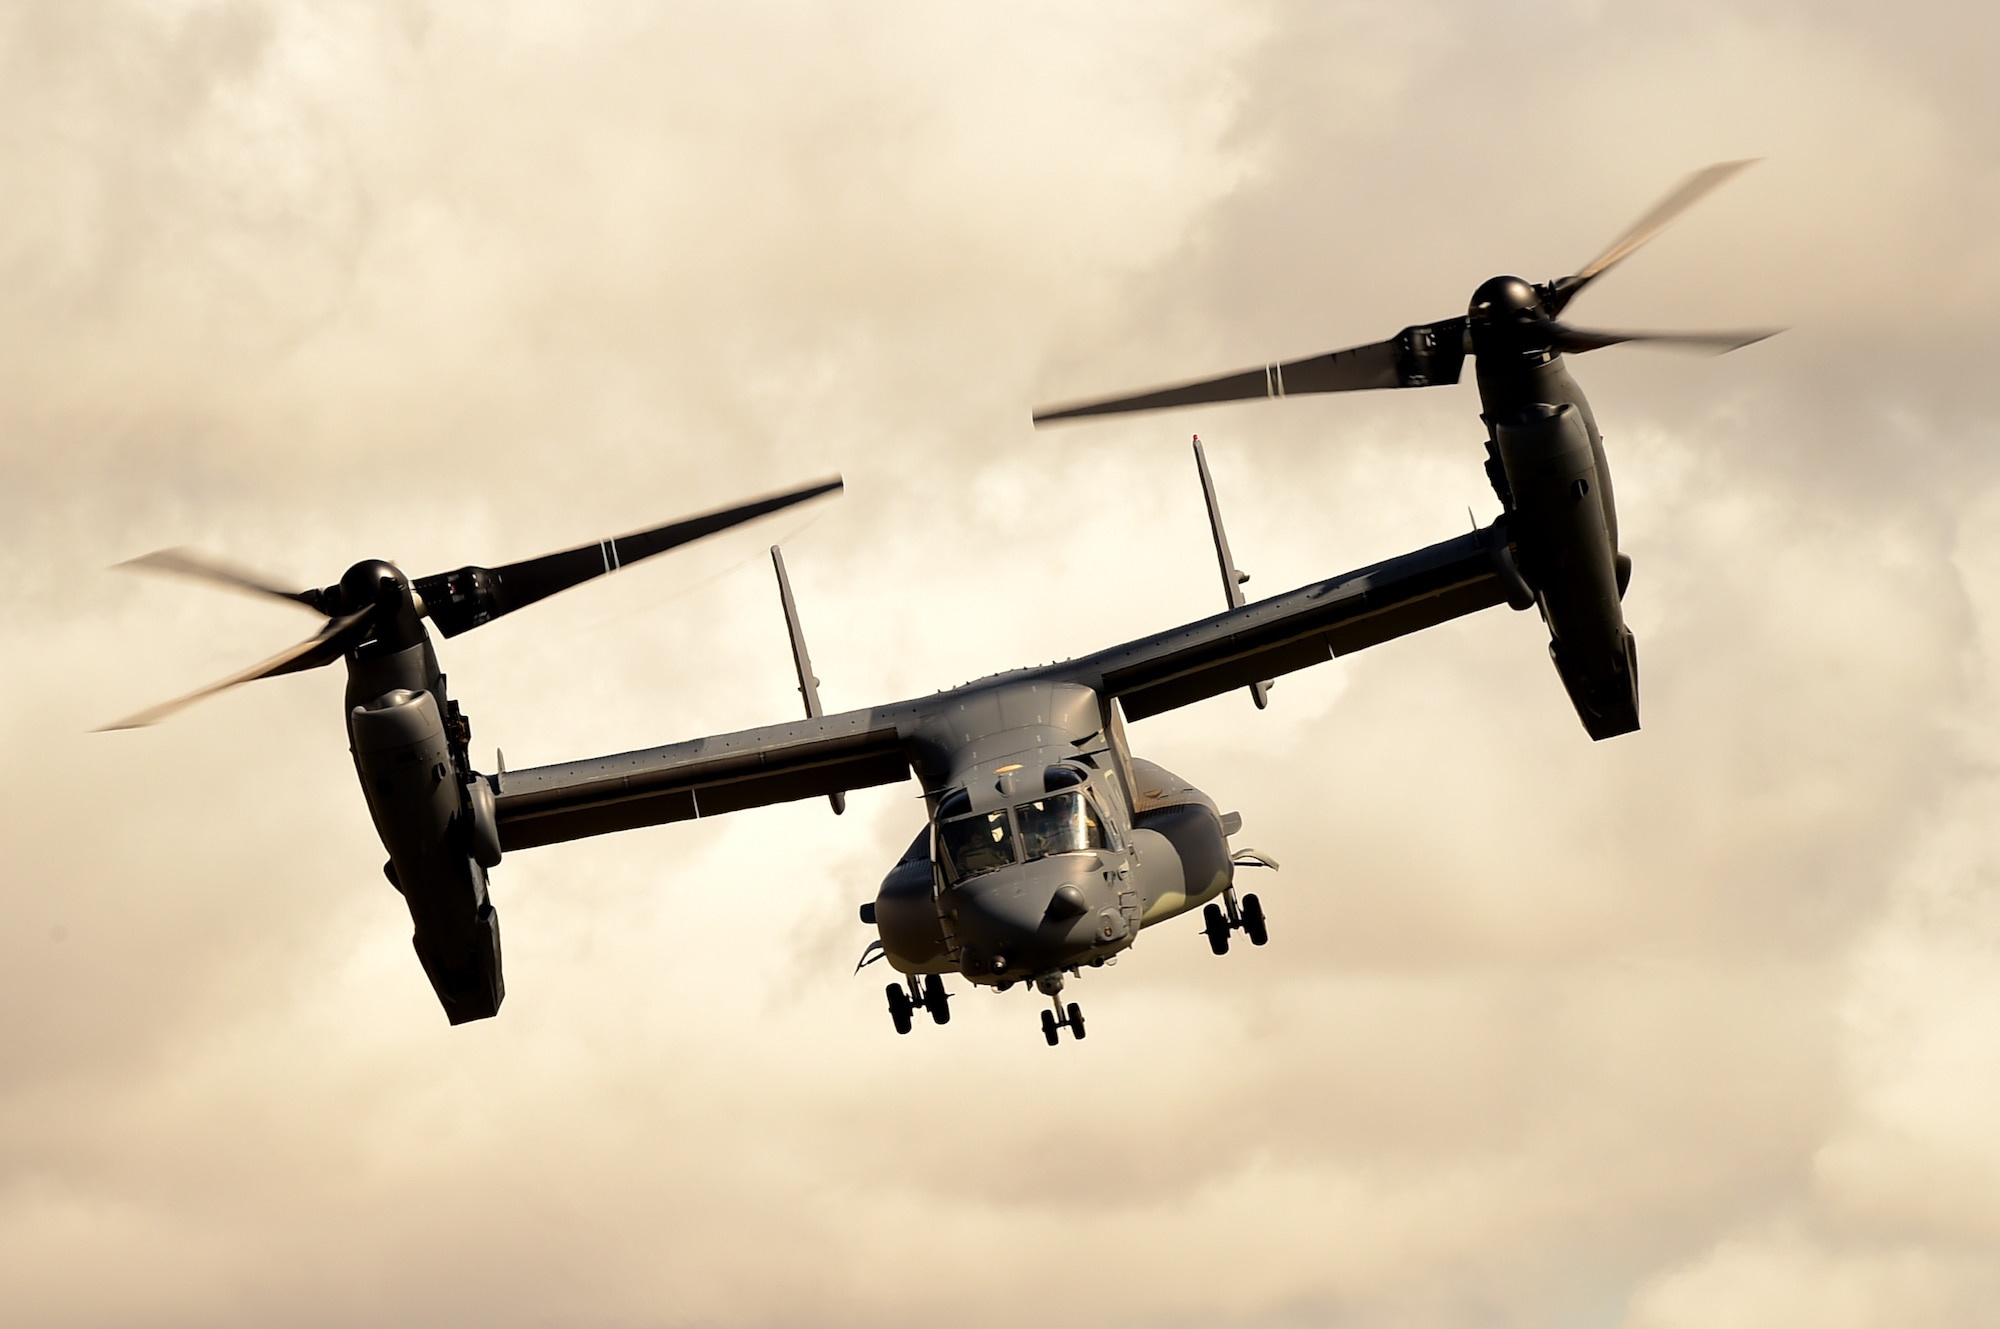 A CV-22B Osprey assigned to the 7th Special Operations Squadron performs an aerial display of its capabilities during the Royal International Air Tattoo at Royal Air Force Fairford, England, July 19, 2015. The U.S. participation in RIAT highlighted the strength of America’s commitment to the security of NATO and its allies. (U.S. Air Force photo/Tech. Sgt. Chrissy Best) 